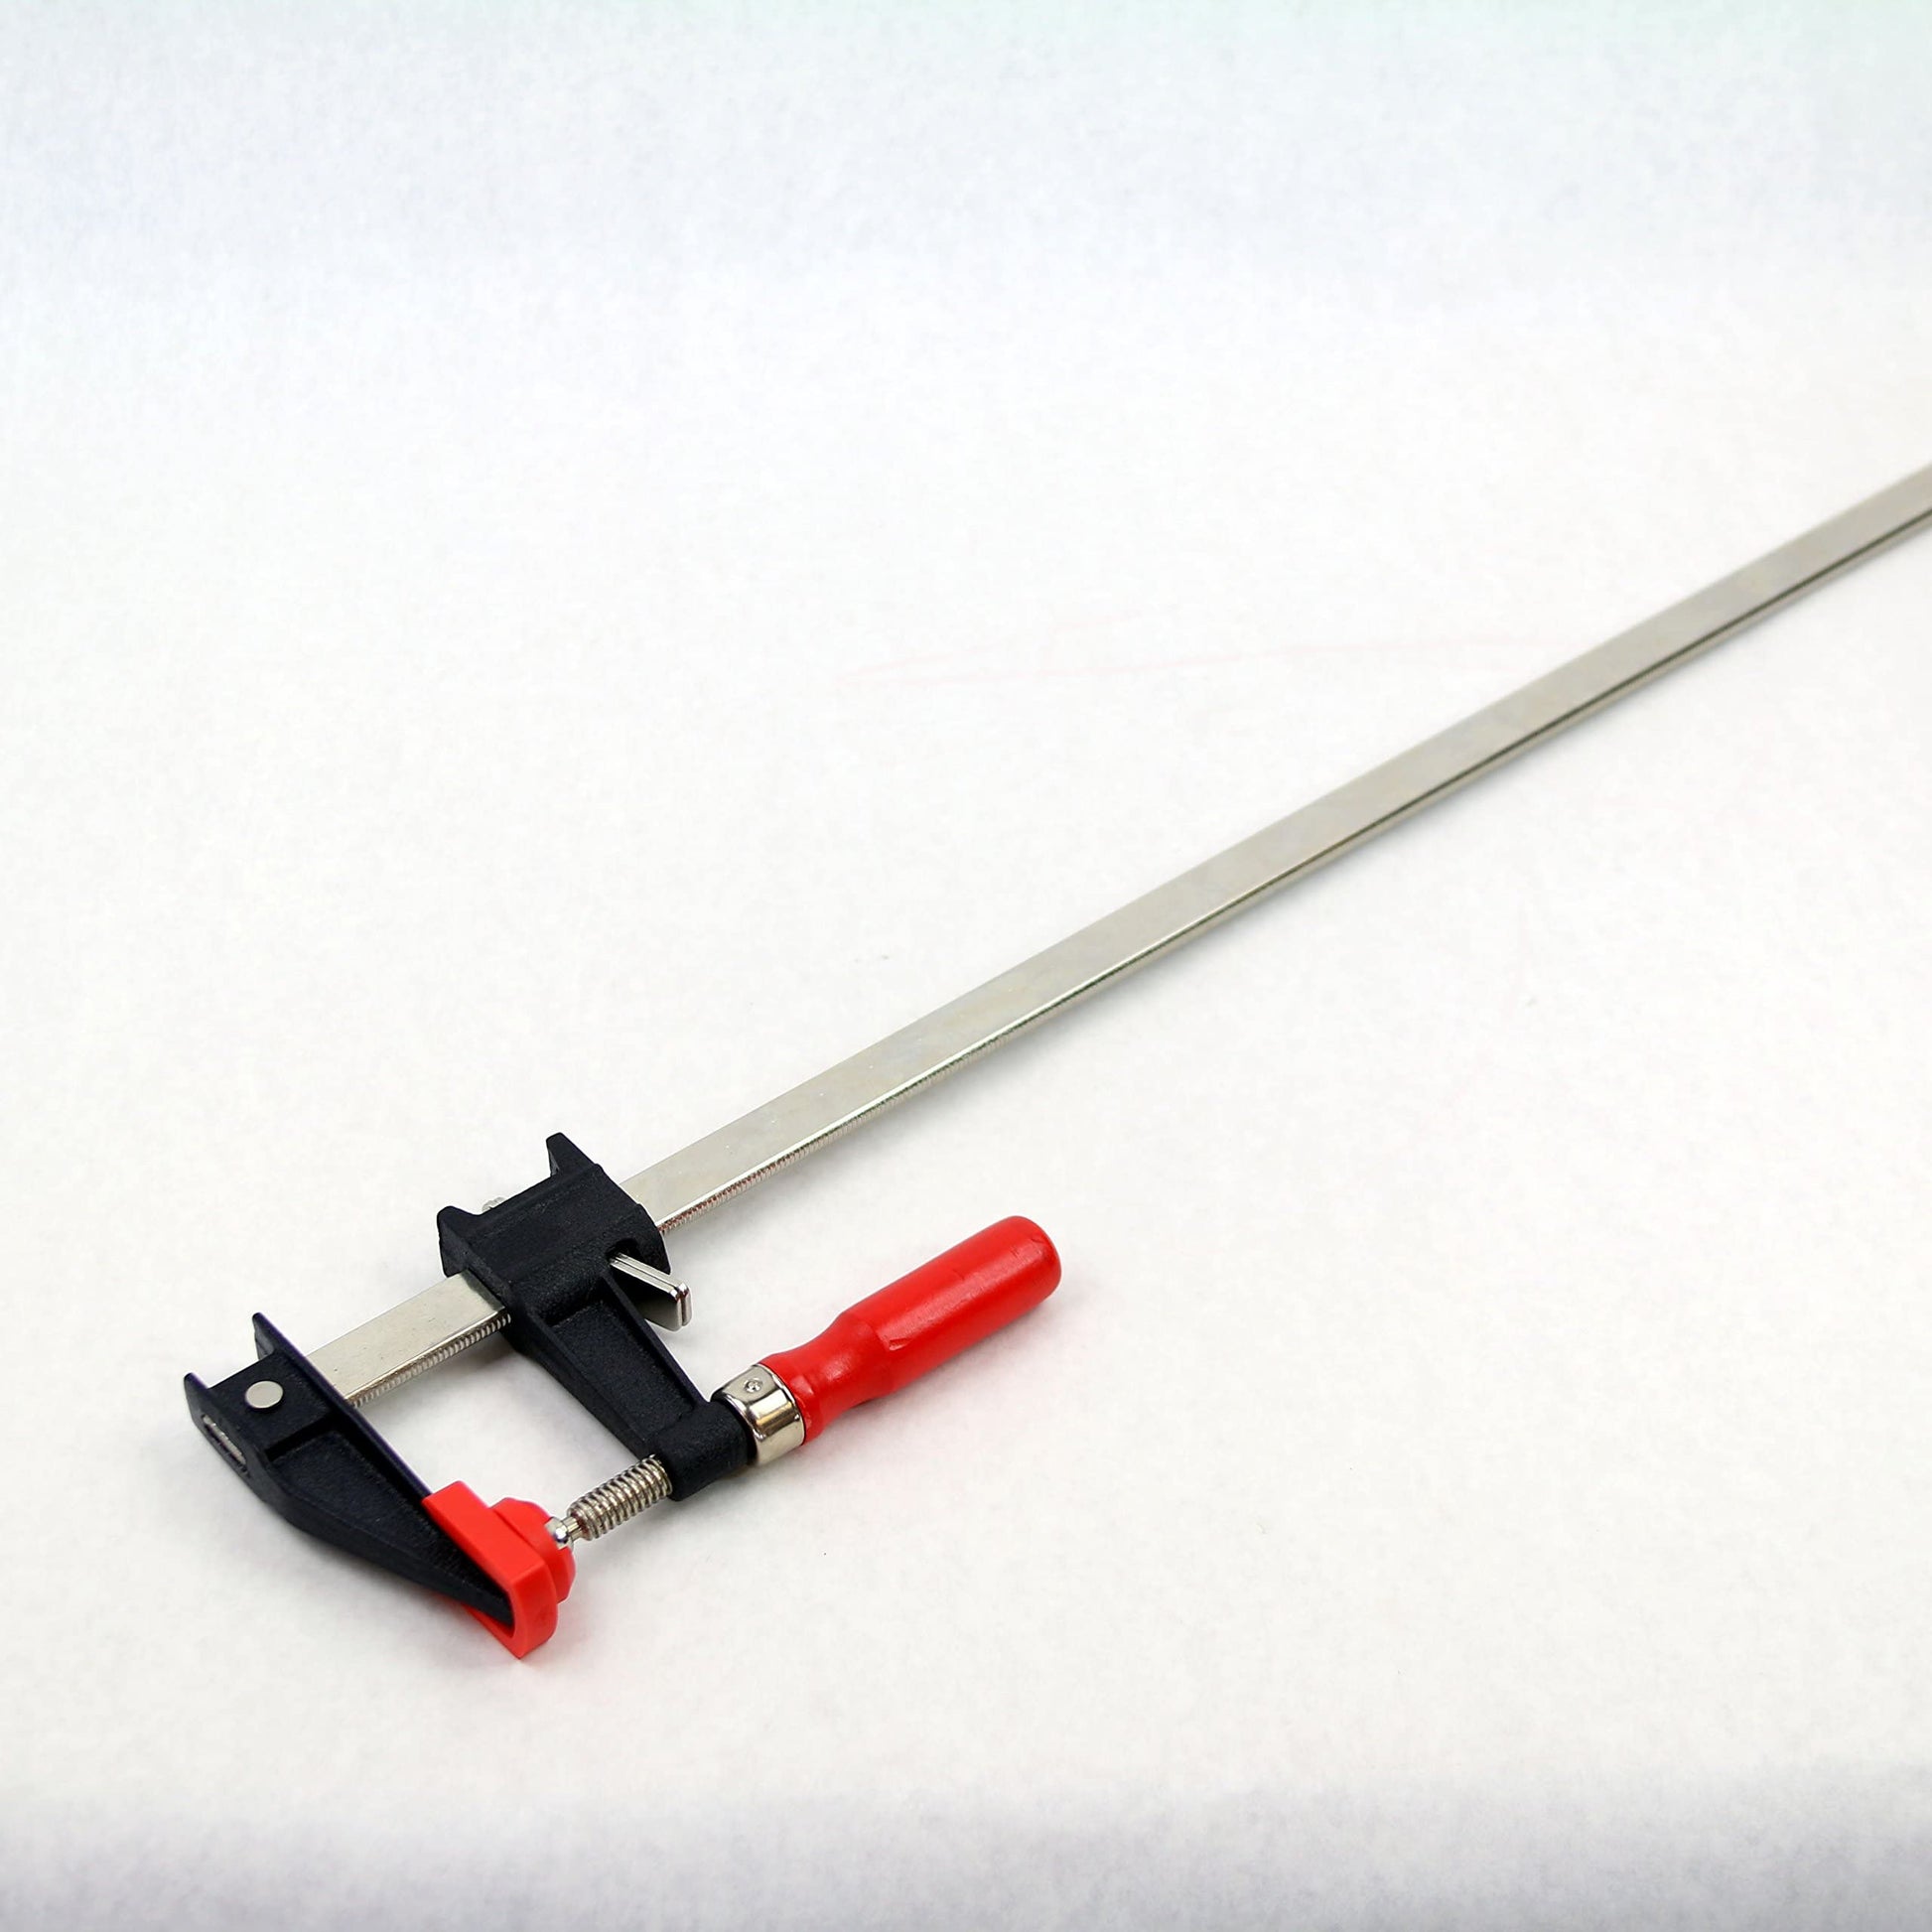 BESSEY Clutch Style 6 in. Capacity Bar Clamp with Wood Handle and